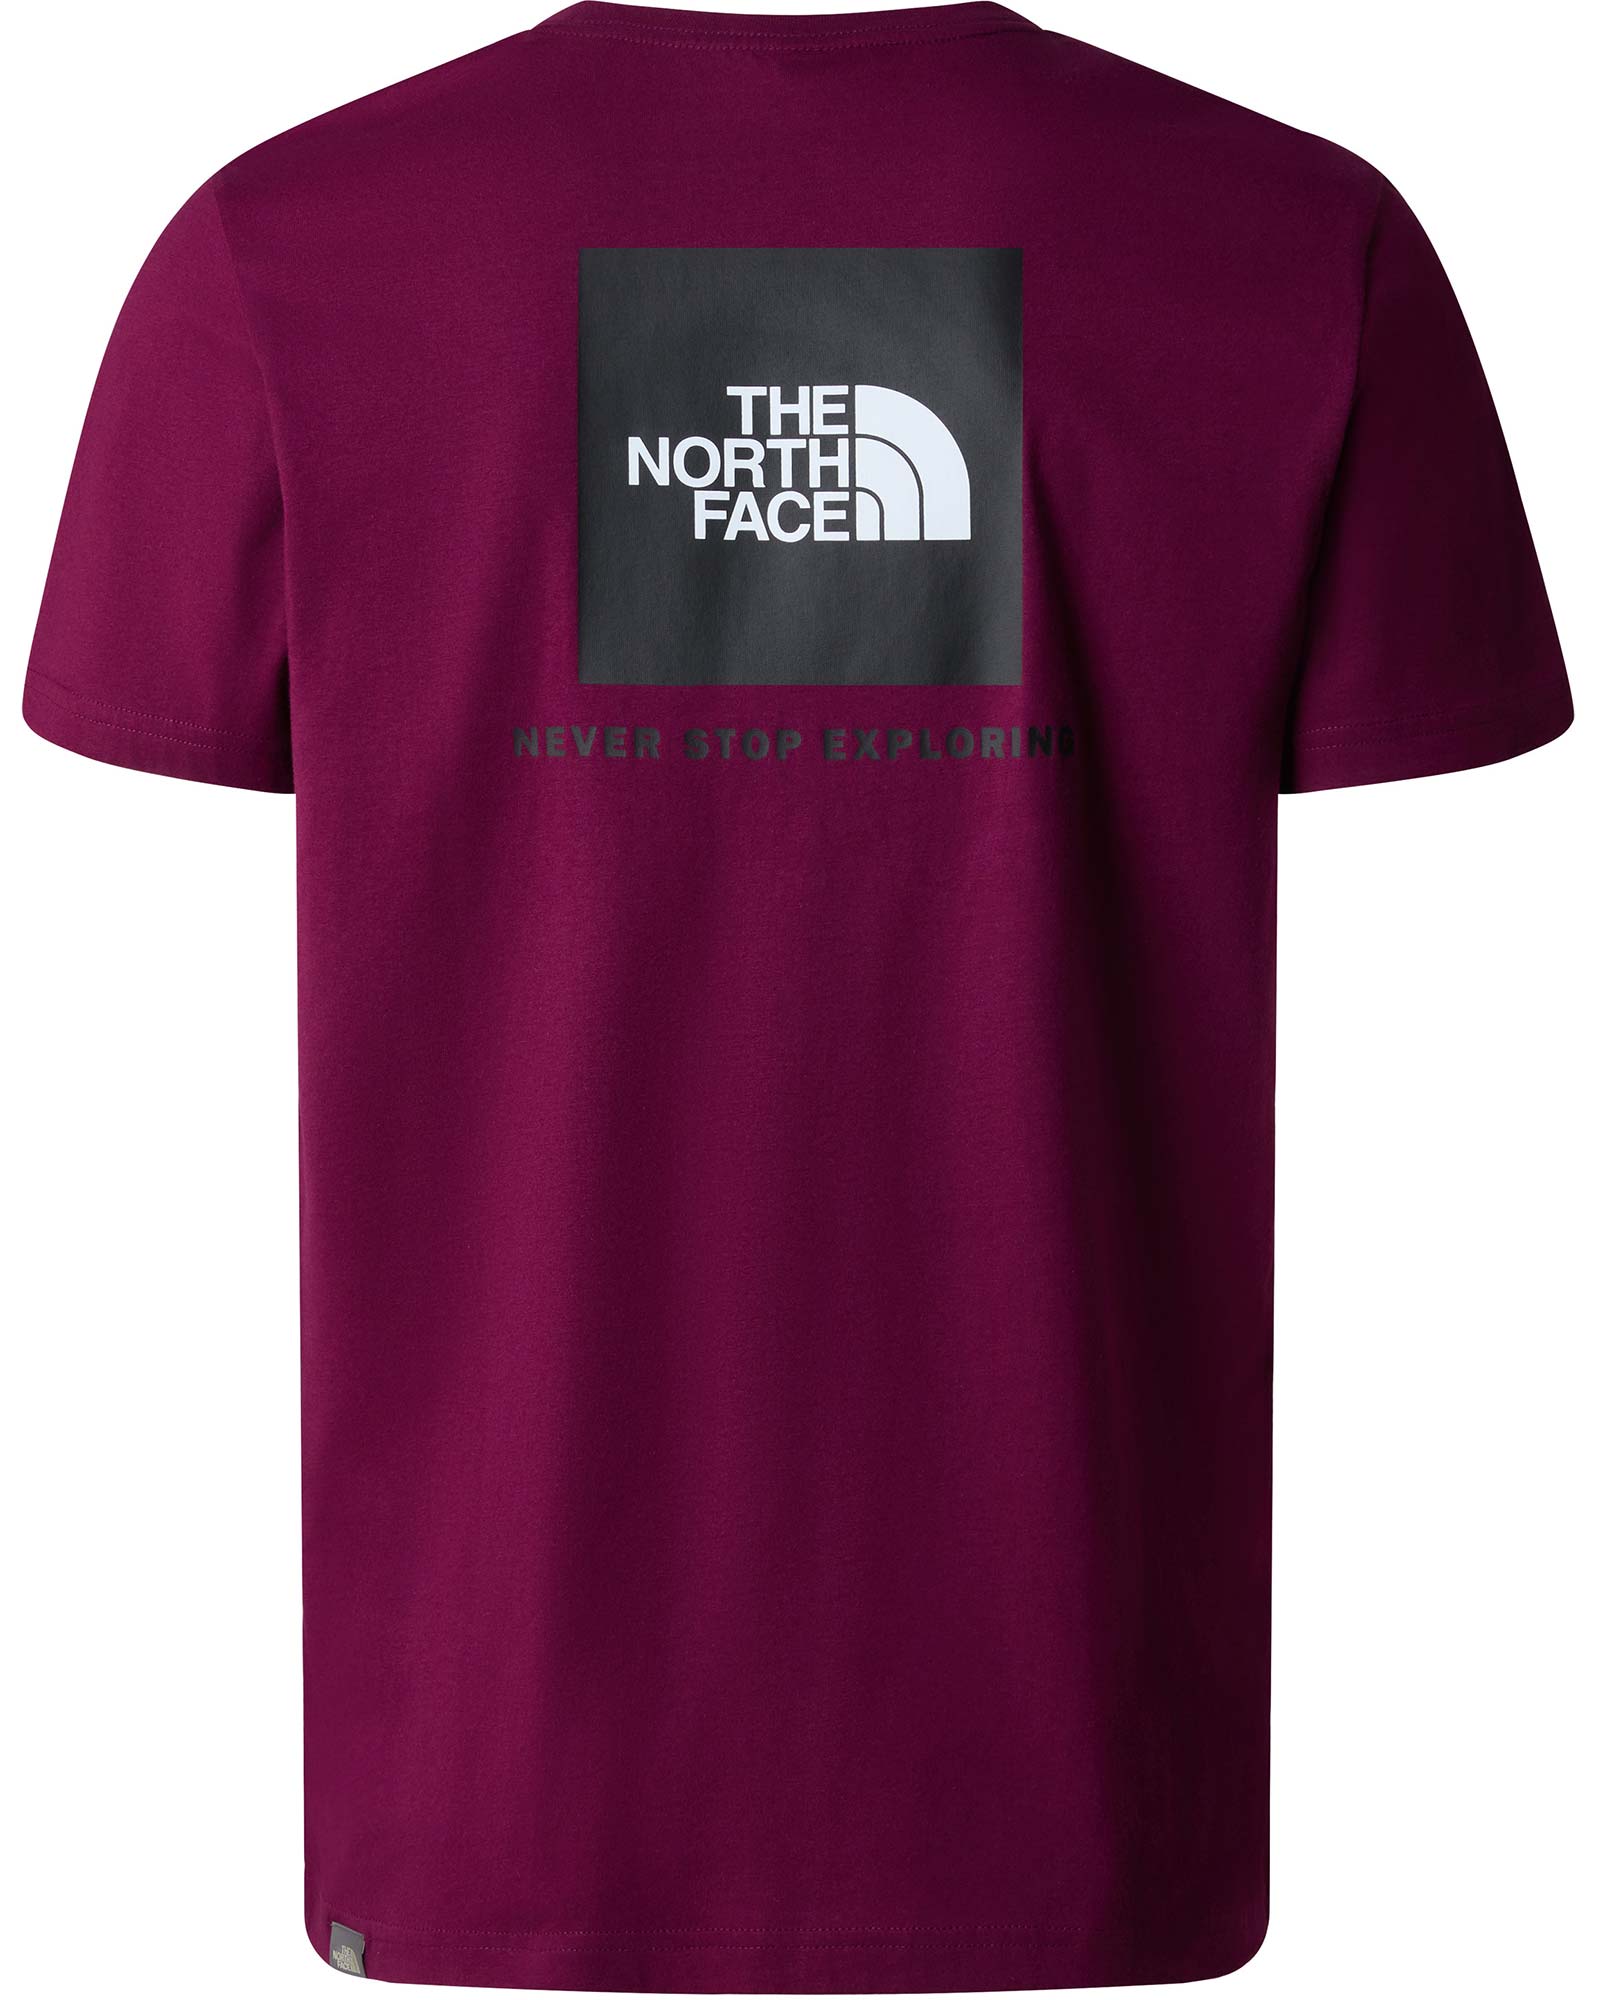 The North Face Red Box Men’s T Shirt - Boysenberry S